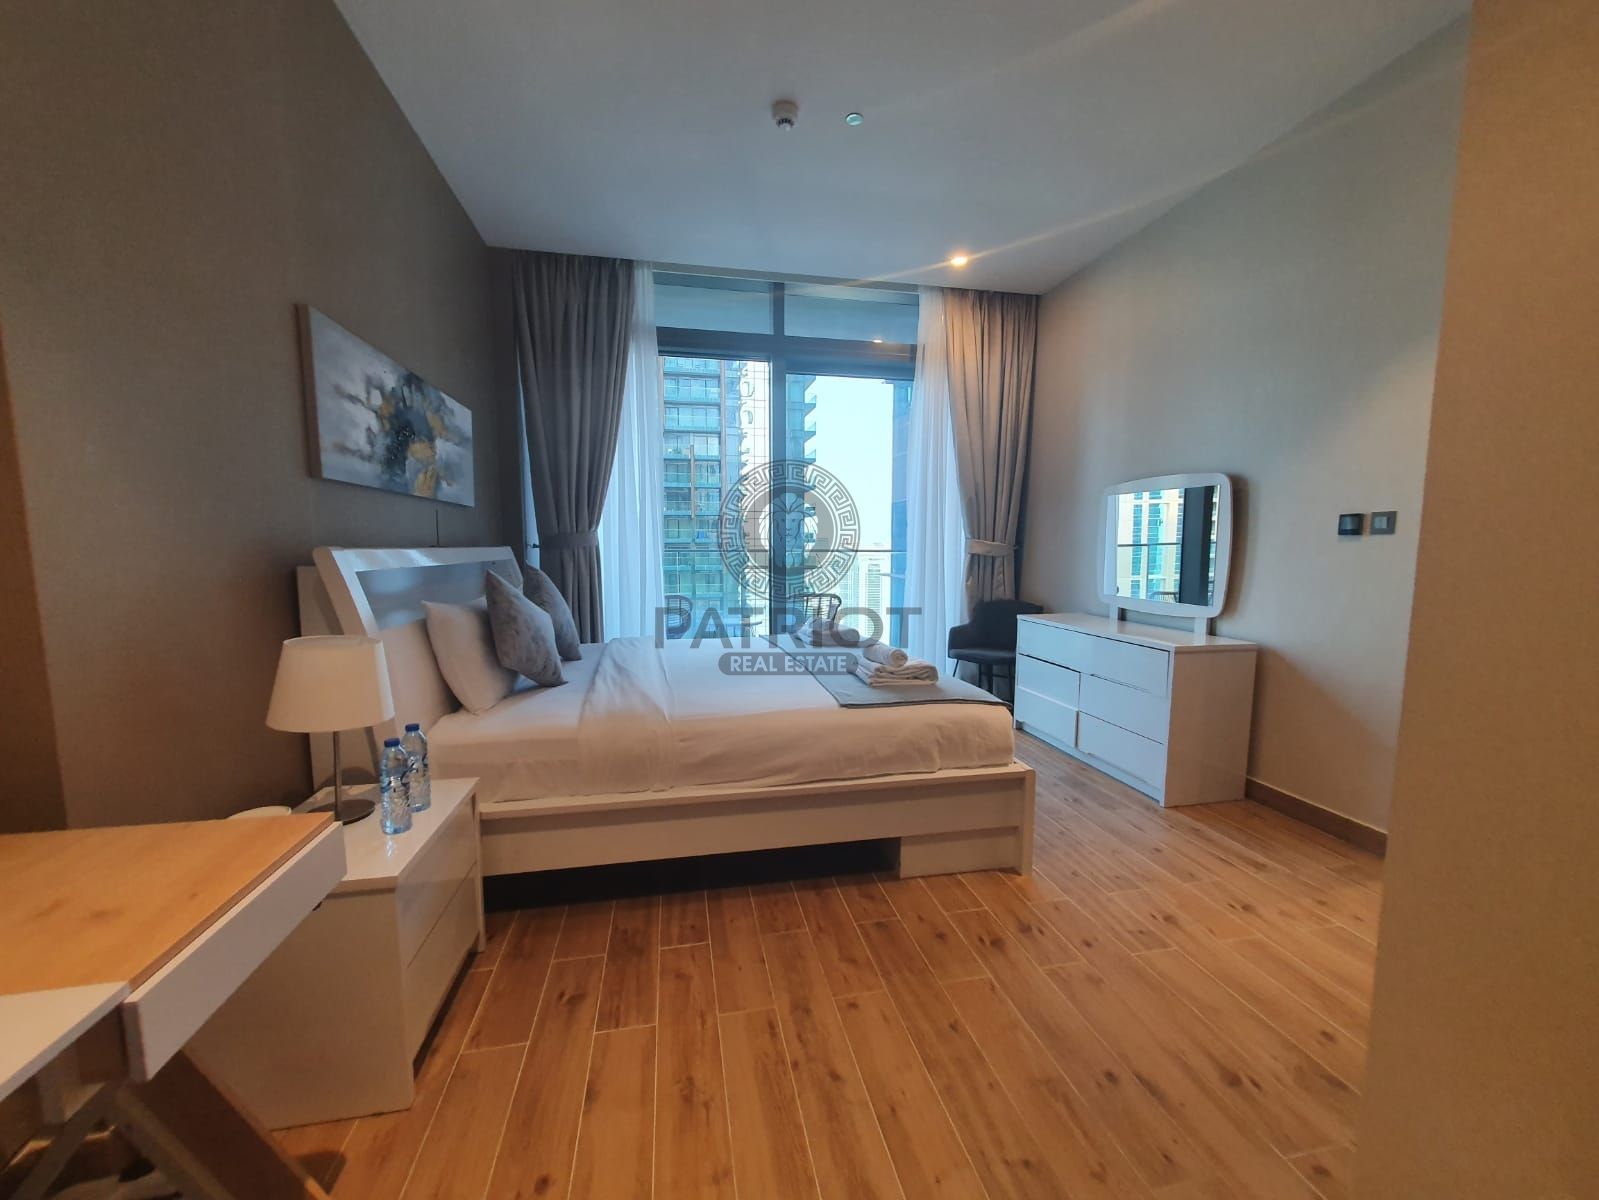 Luxury Fully furnished 1BR apertment for rent including all bills